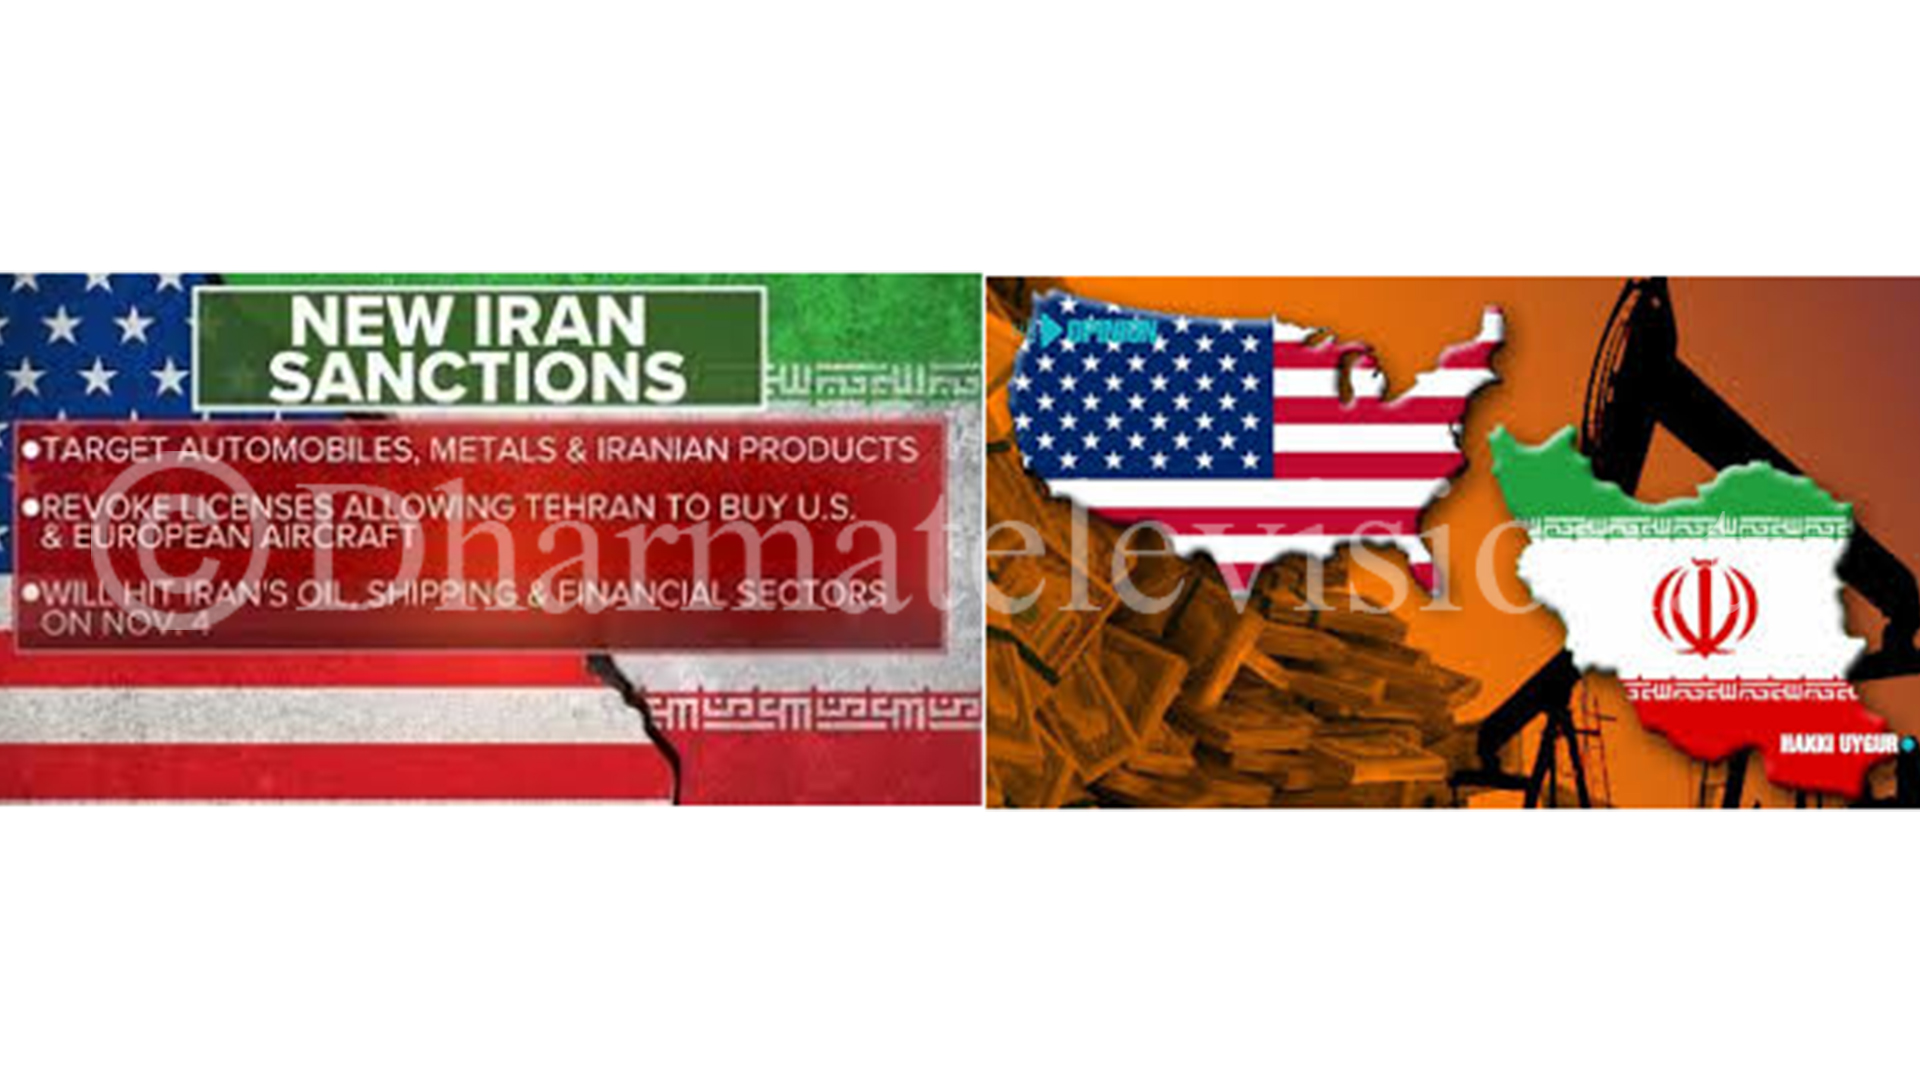 Iran hit by New US Sanctions - accused of human rights violation